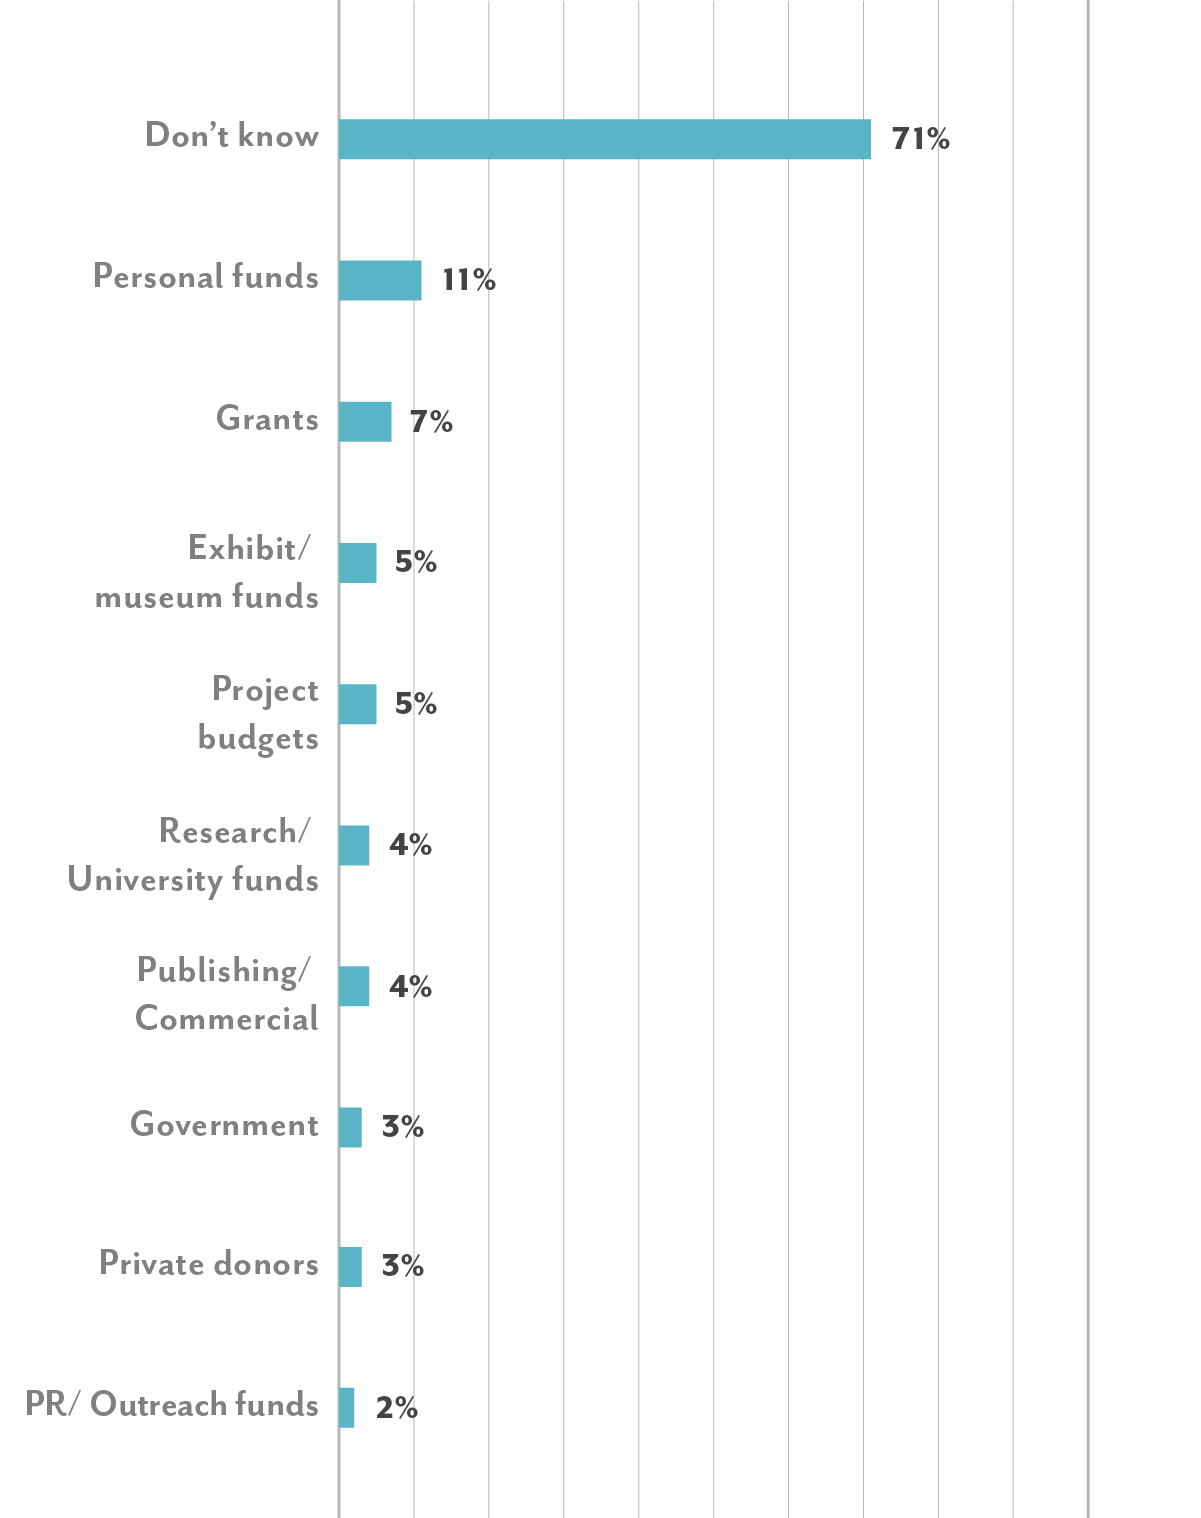 Don’t know: 71%. Personal funds: 11% in 2019. Grants: 7%. Exhibit/Museum funds: 5%. Project budgets: 5%. Research/University funds: 4%. Publishing/Commercial: 4%. Government: 5%. Private donor: 3%. PR/Outreach funds: 2% Other: 4%.